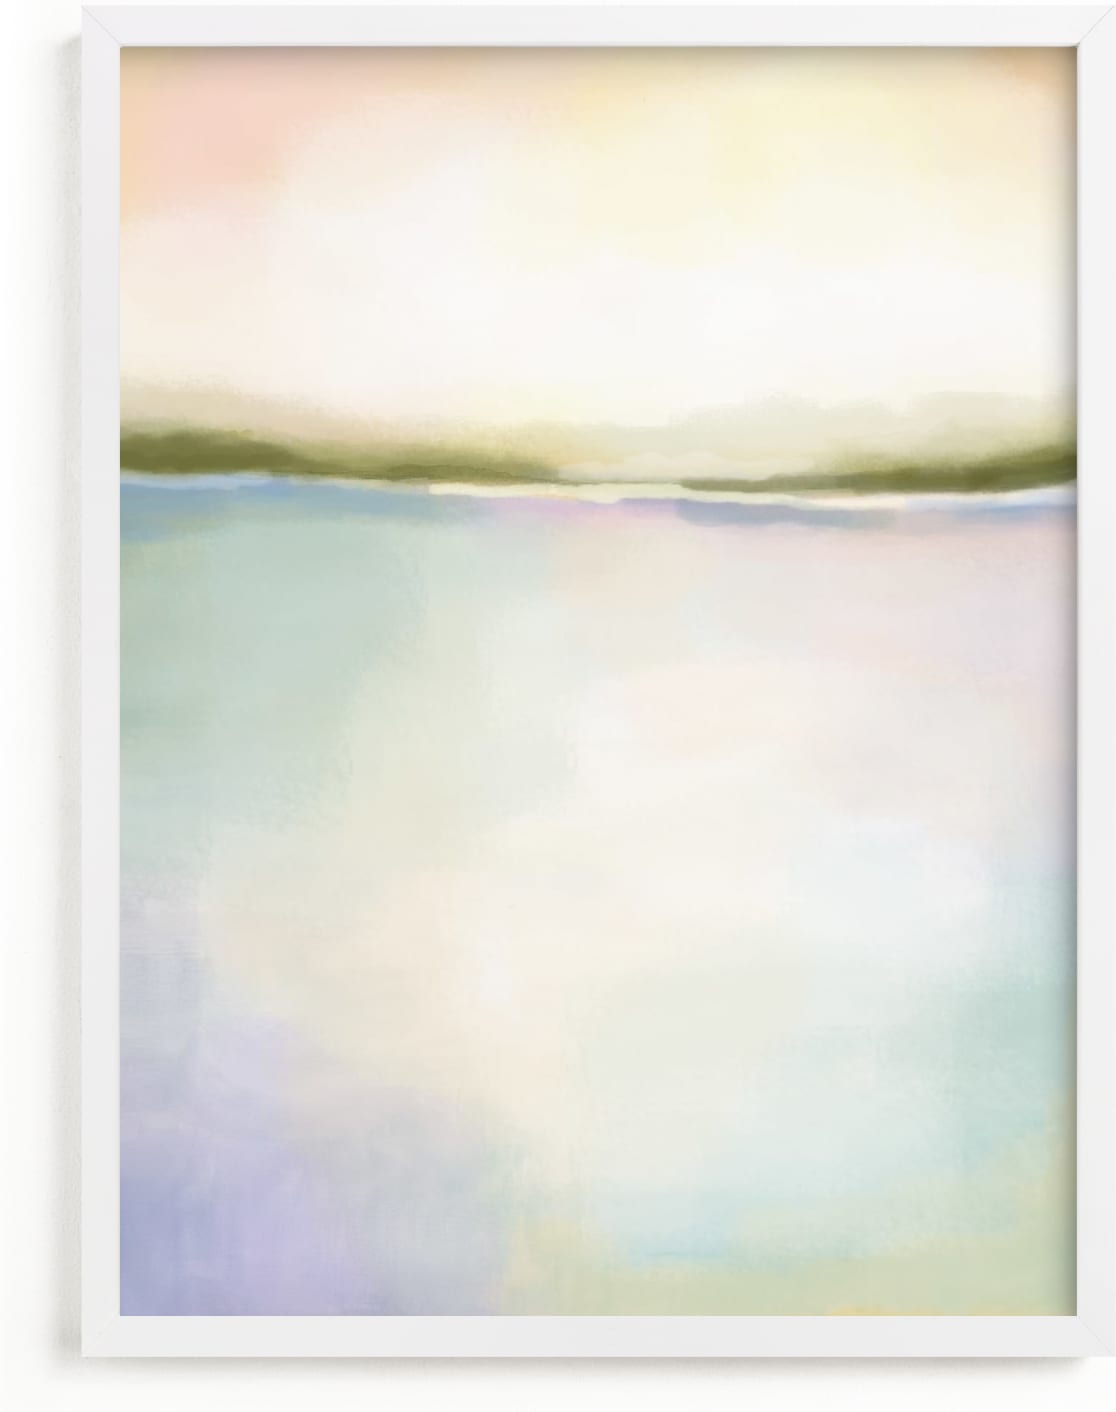 This is a blue nursery wall art by AlisonJerry called Coral Bay.